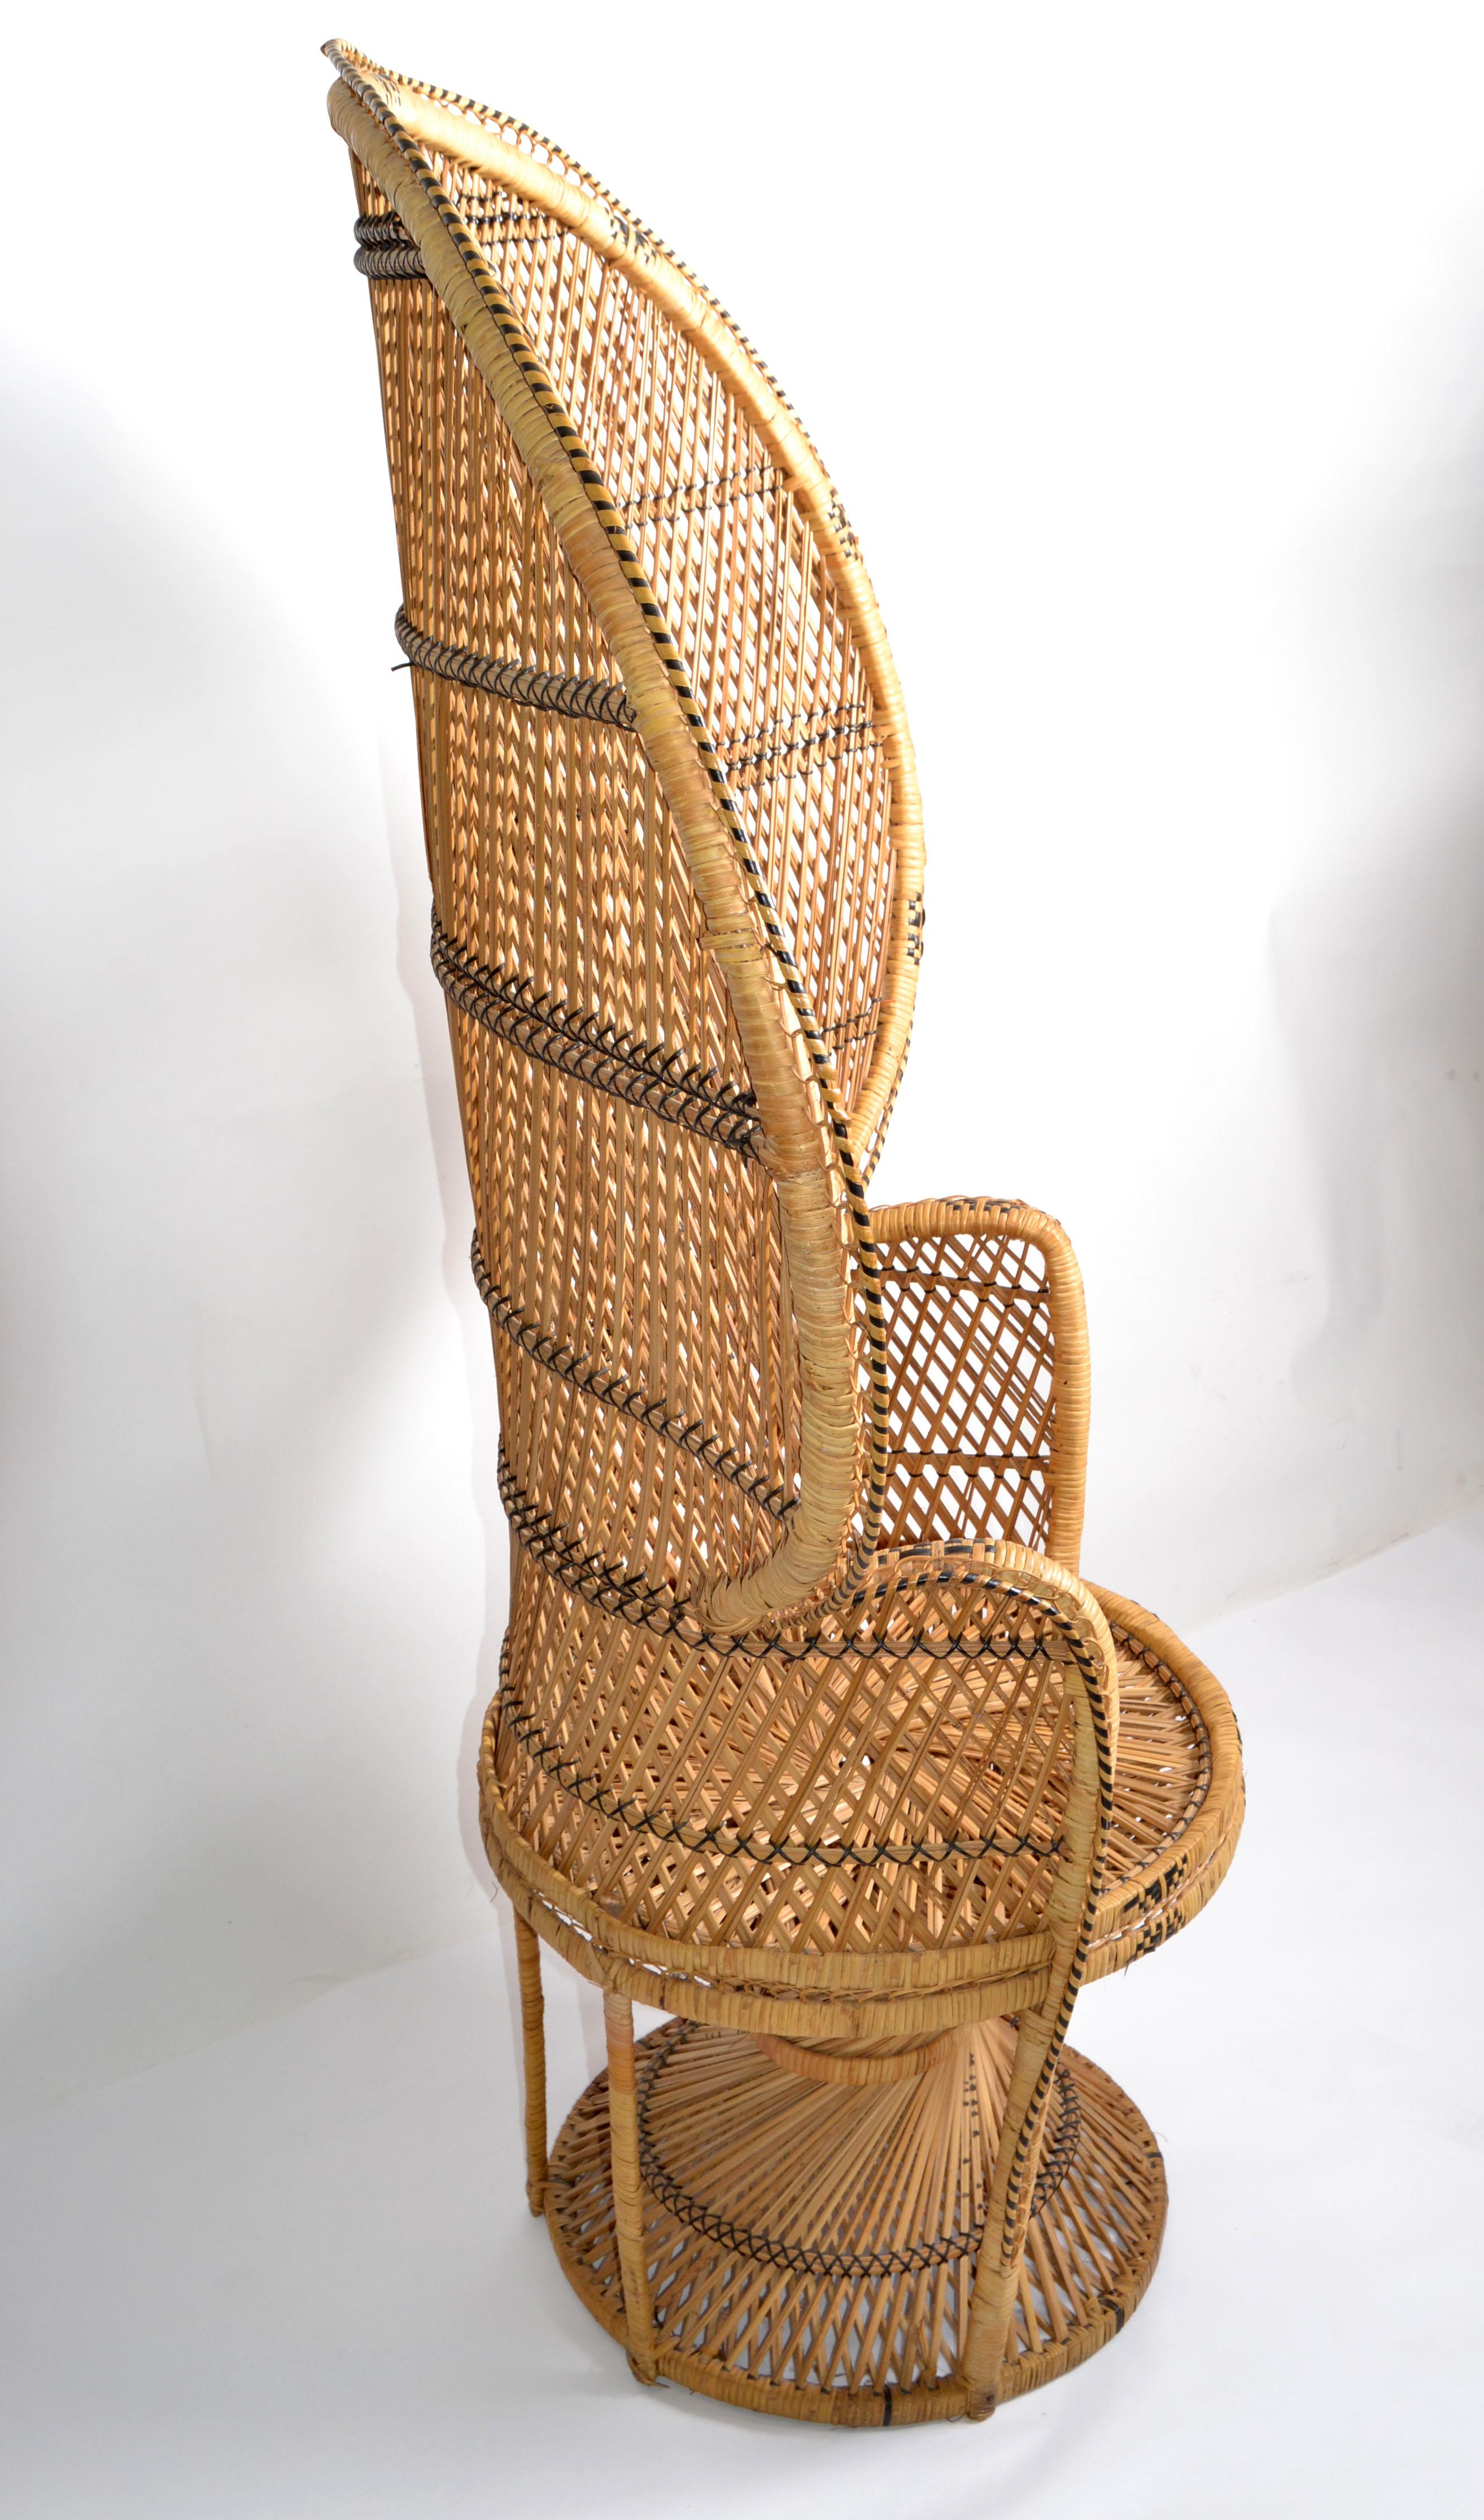 peacock wicker chair for sale